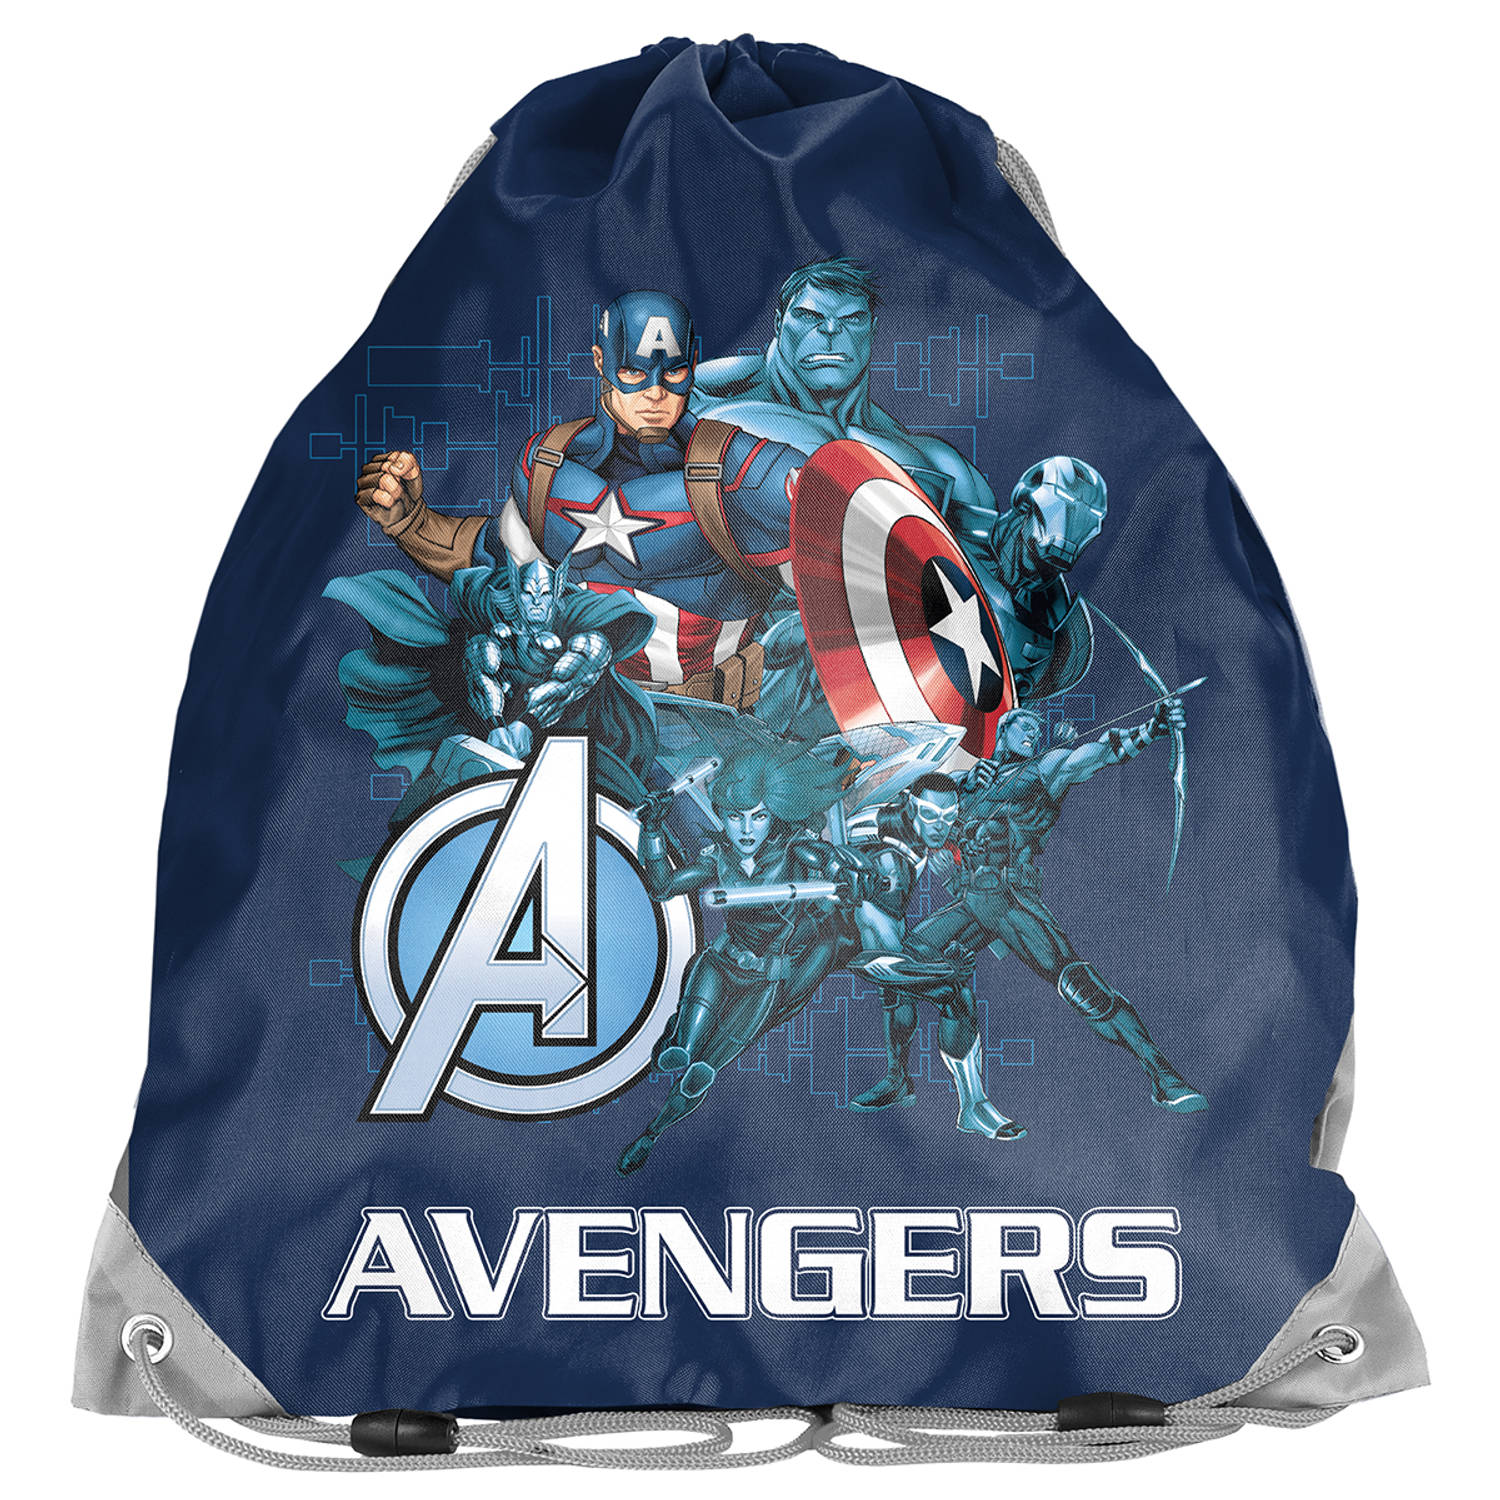 Marvel Avengers Gymbag, Mightiest Heroes 38 X 34 Cm Polyester